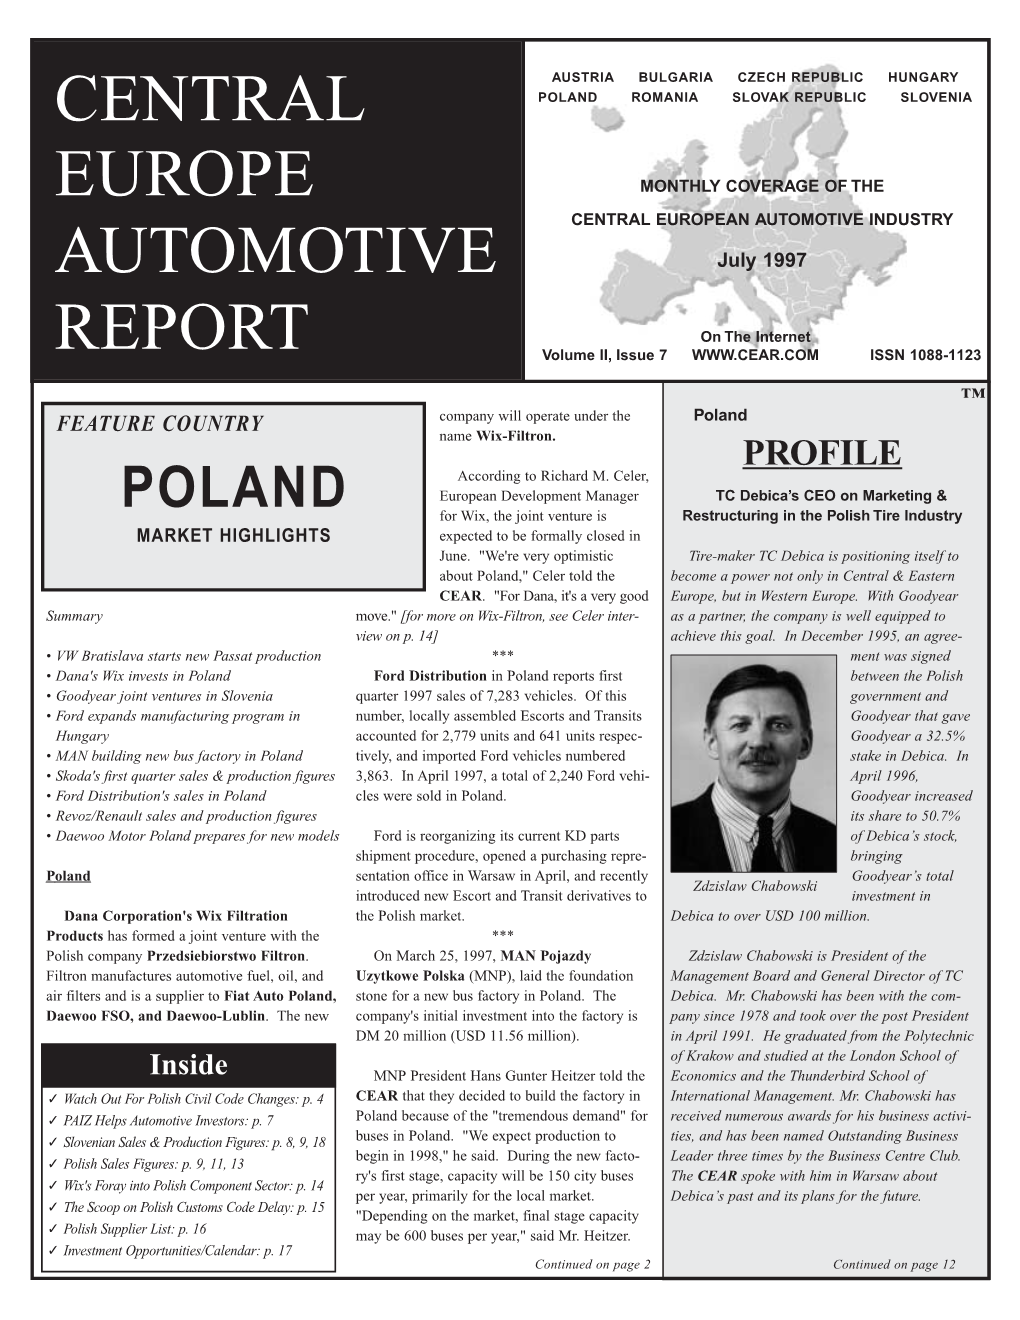 Central Europe Automotive Report